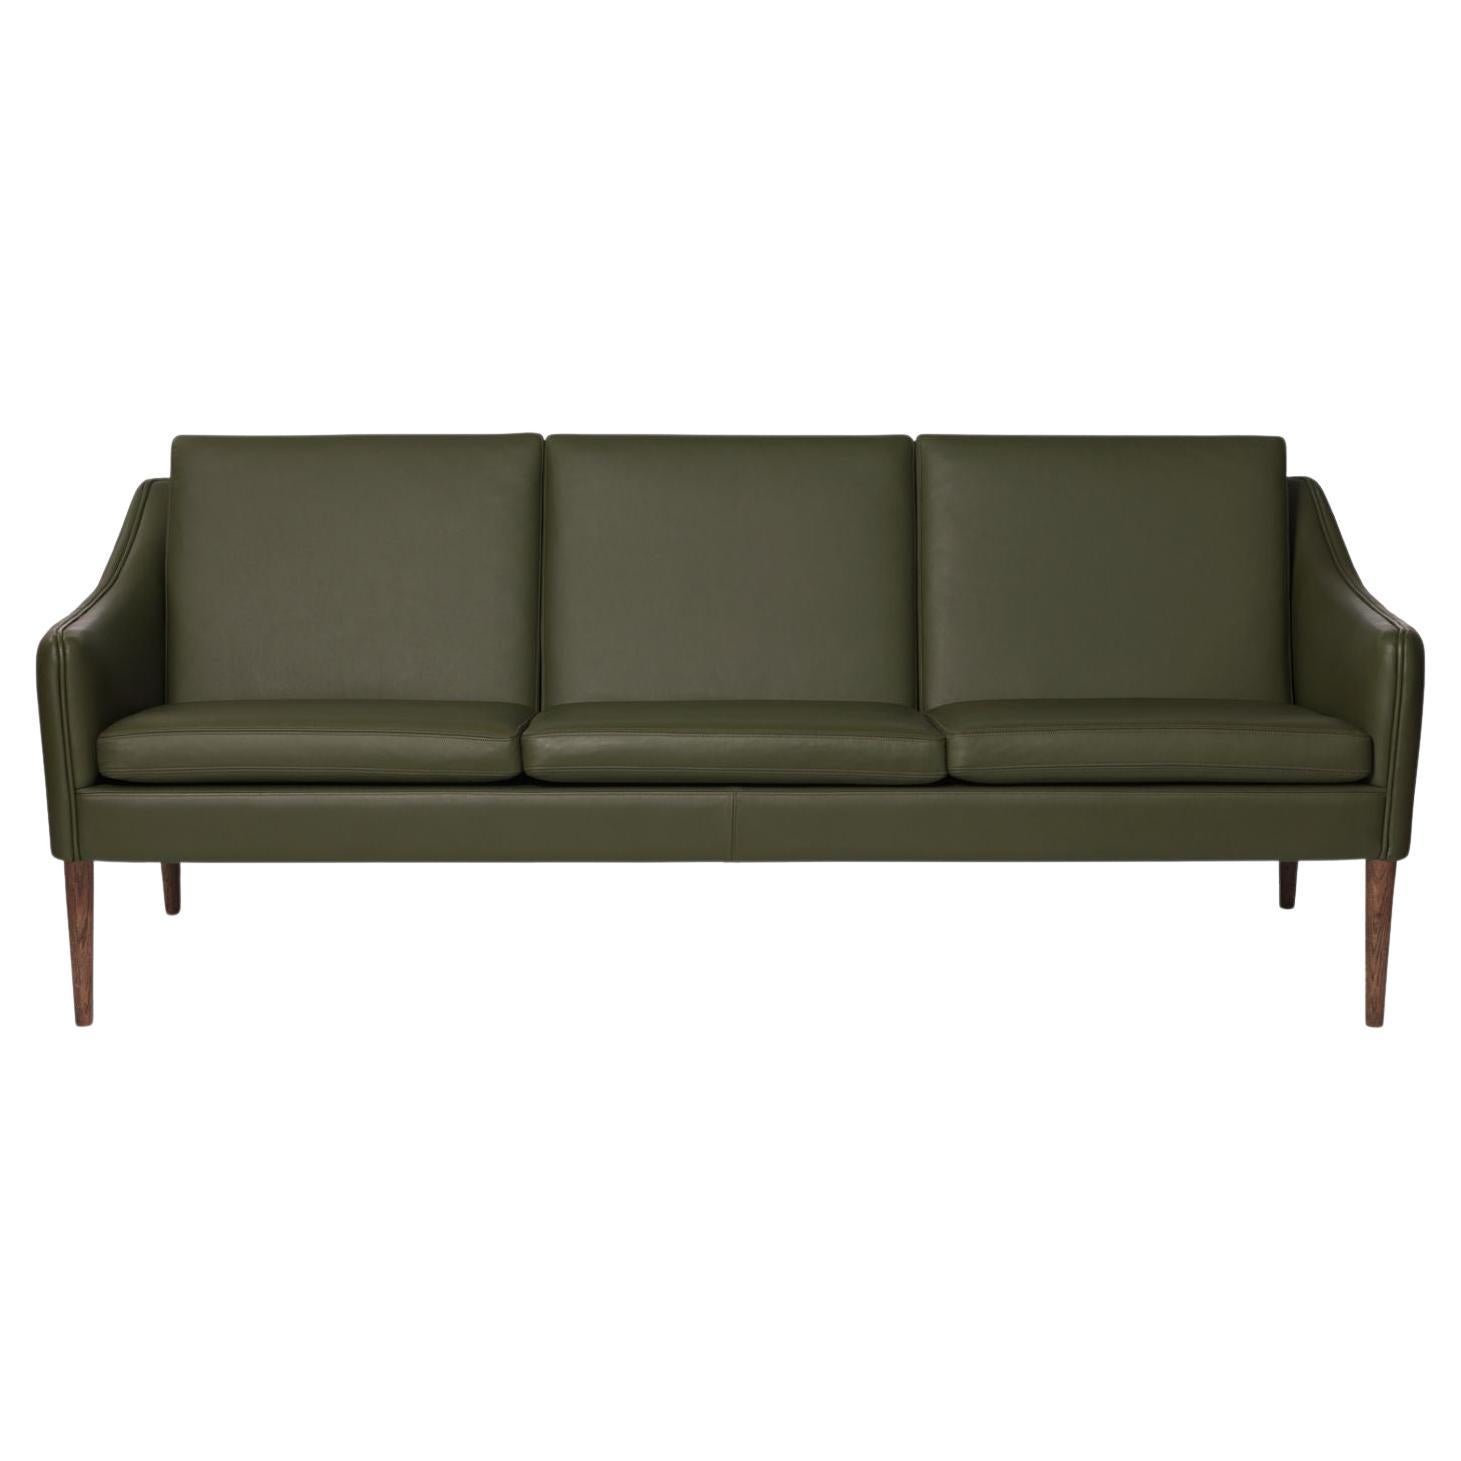 Mr Olsen 3 Seater Oak Challenger Pickle Green Leather by Warm Nordic